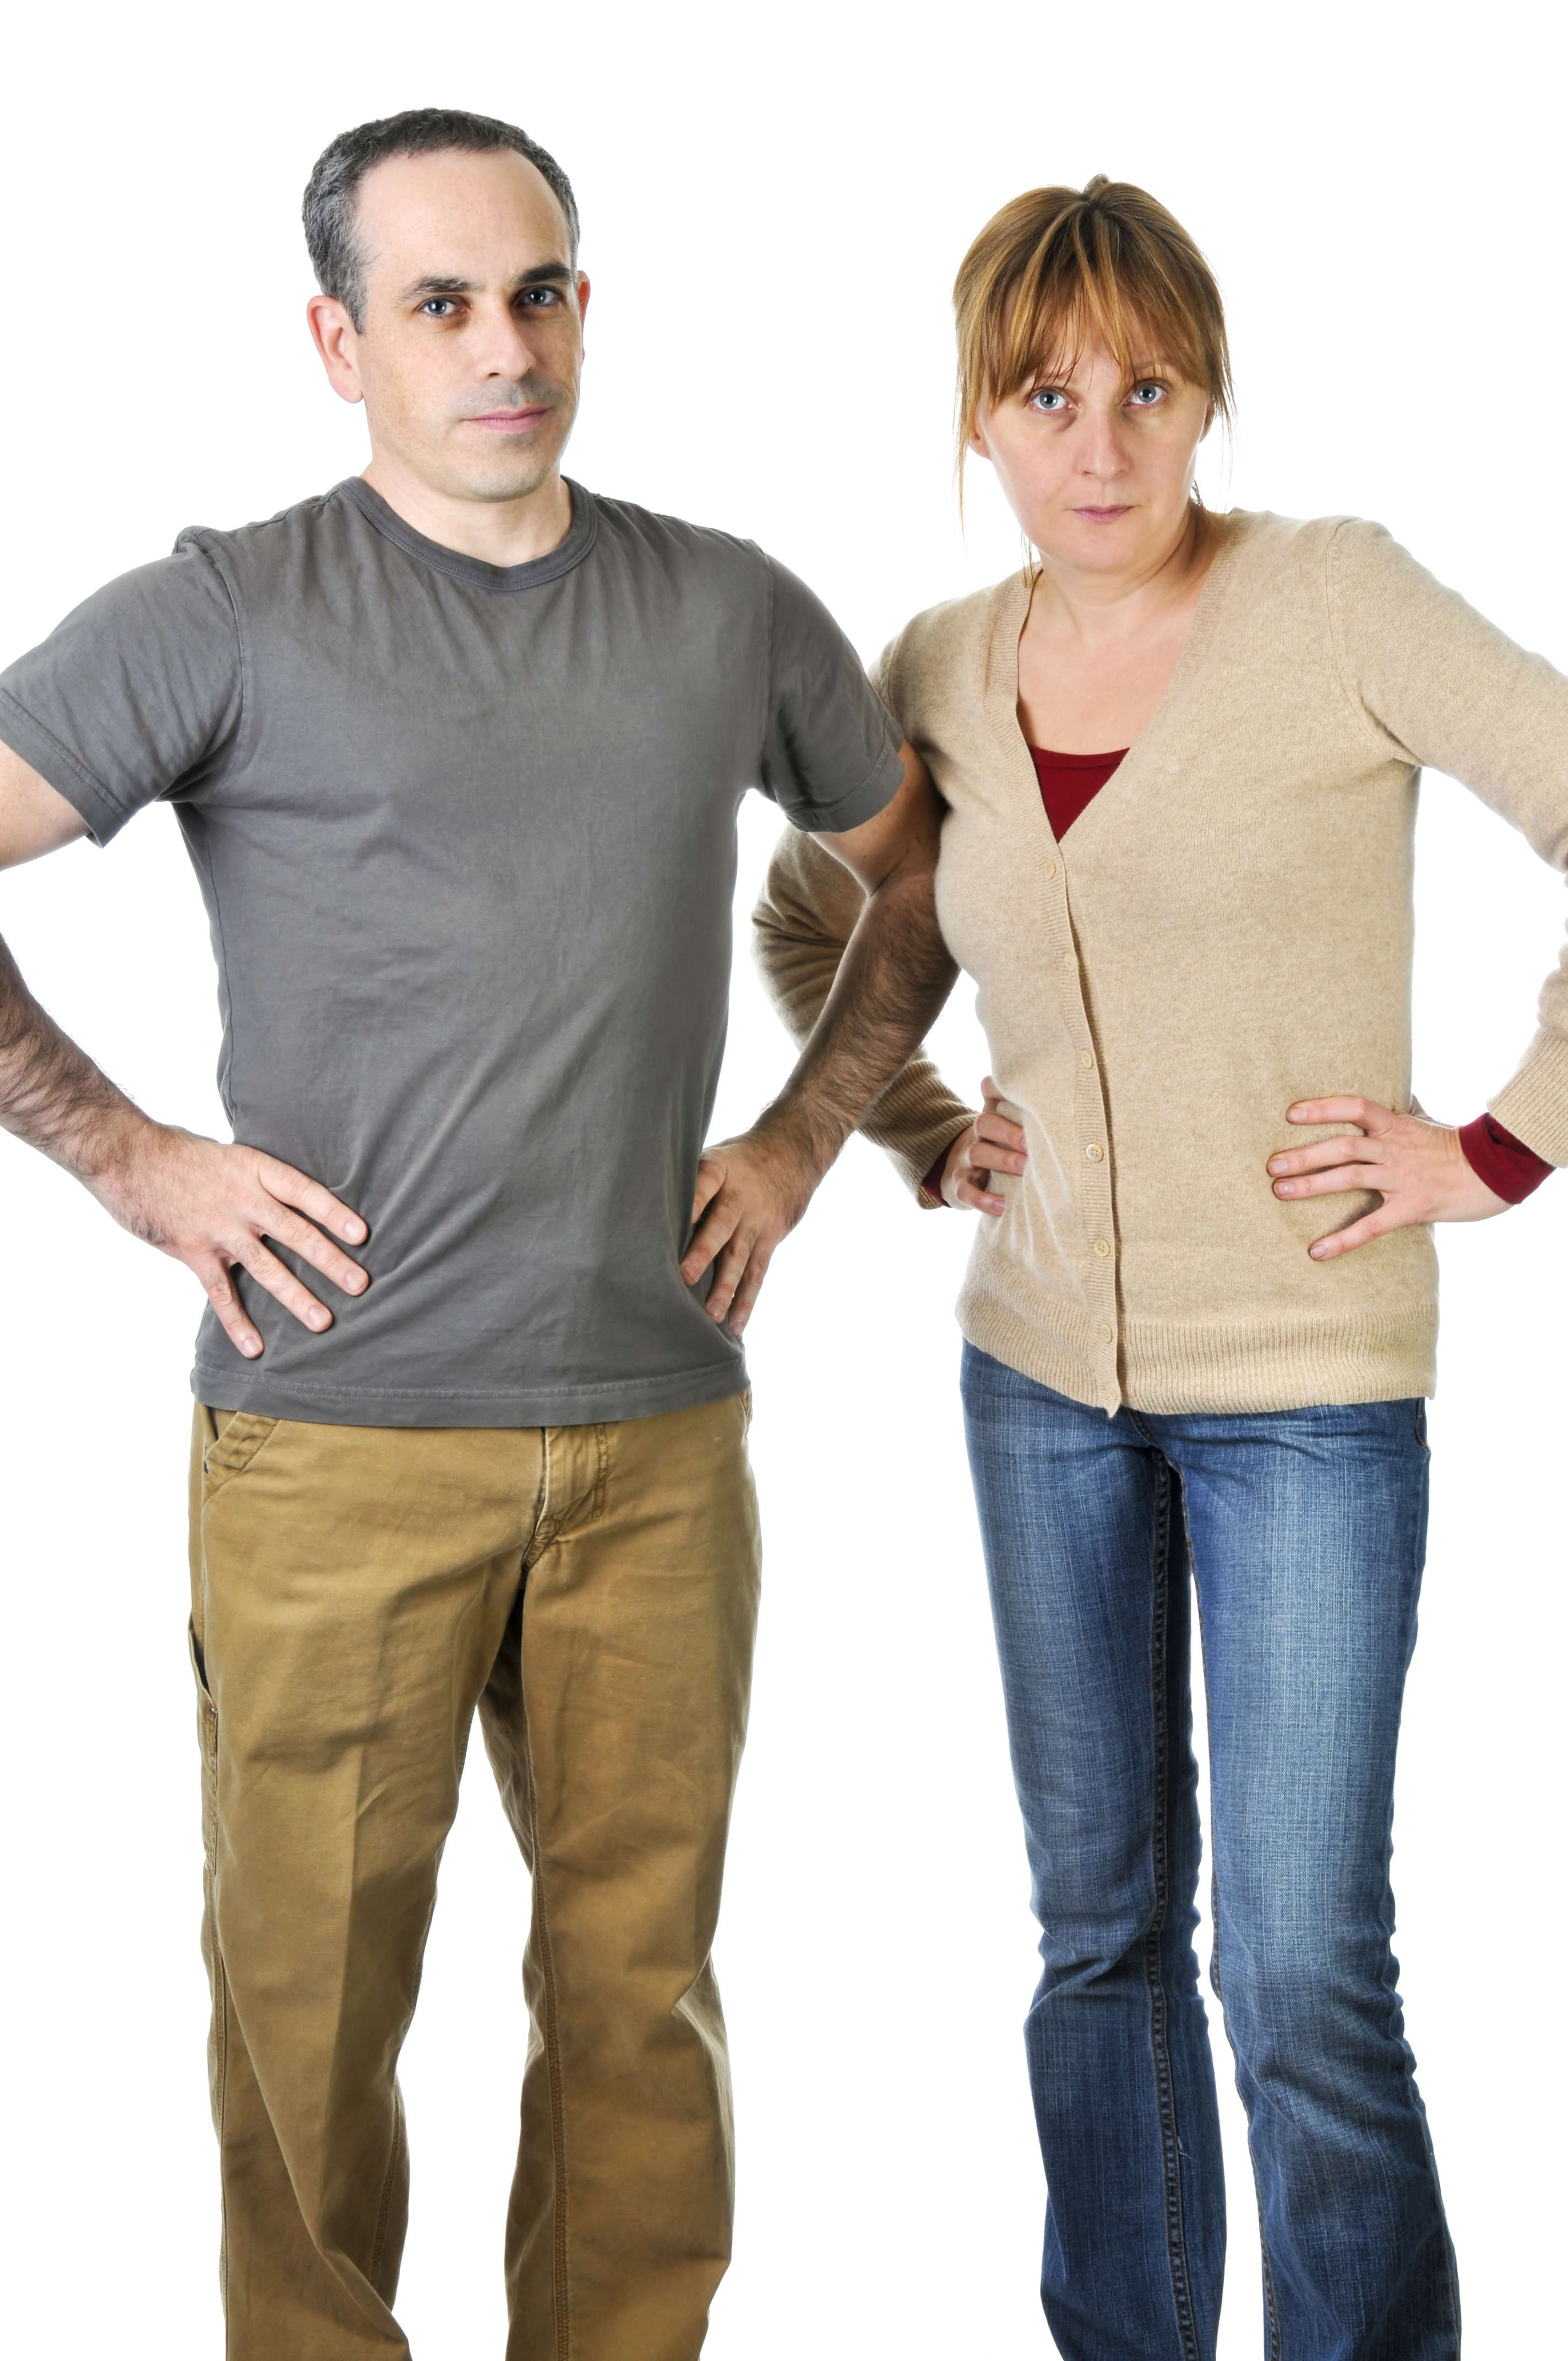 A man and a woman expressing contempt | Source: Shutterstock